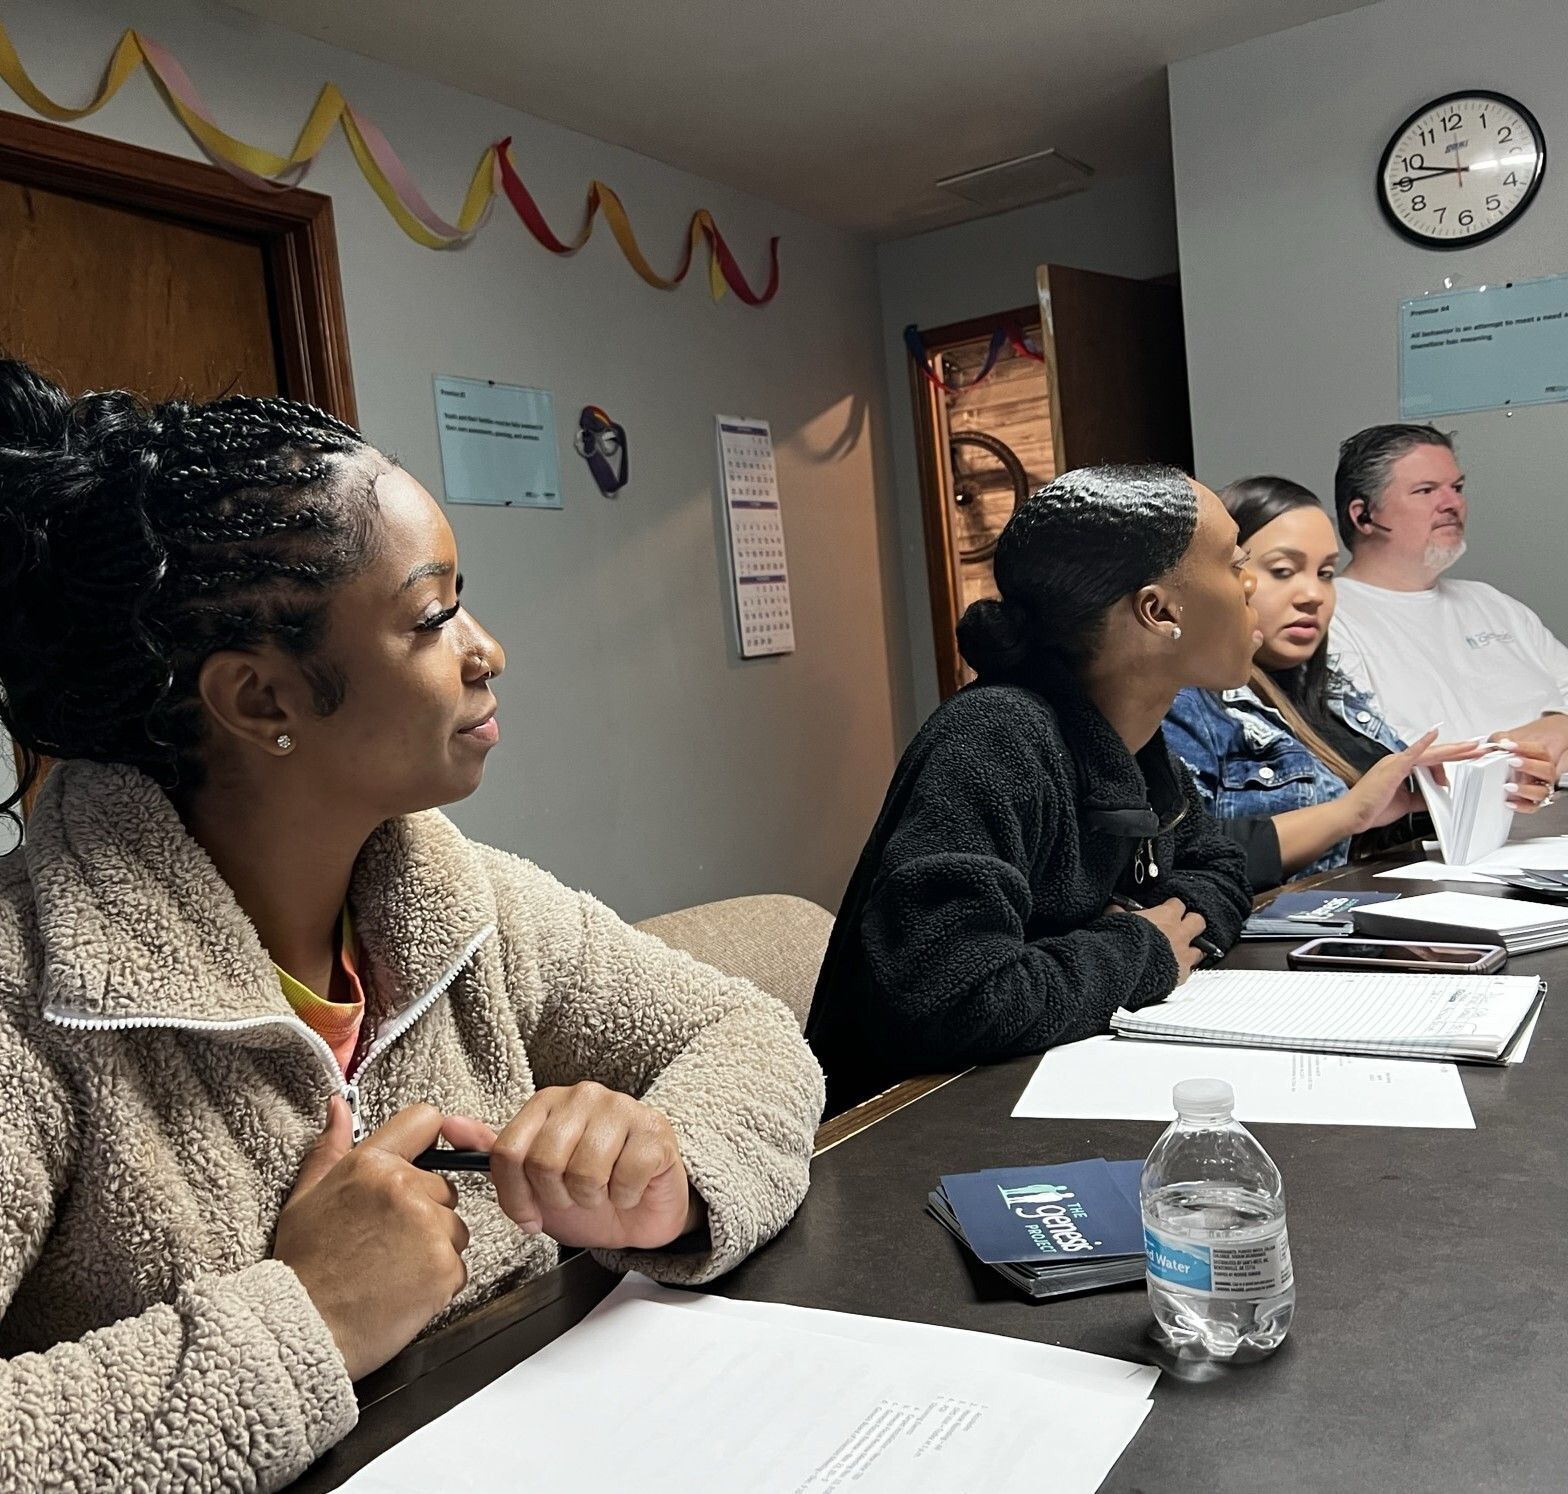 Kalia Briggs is one of two team members who are certified to teach S.T.A.R.T., a training program designed to support a trauma-informed environment.